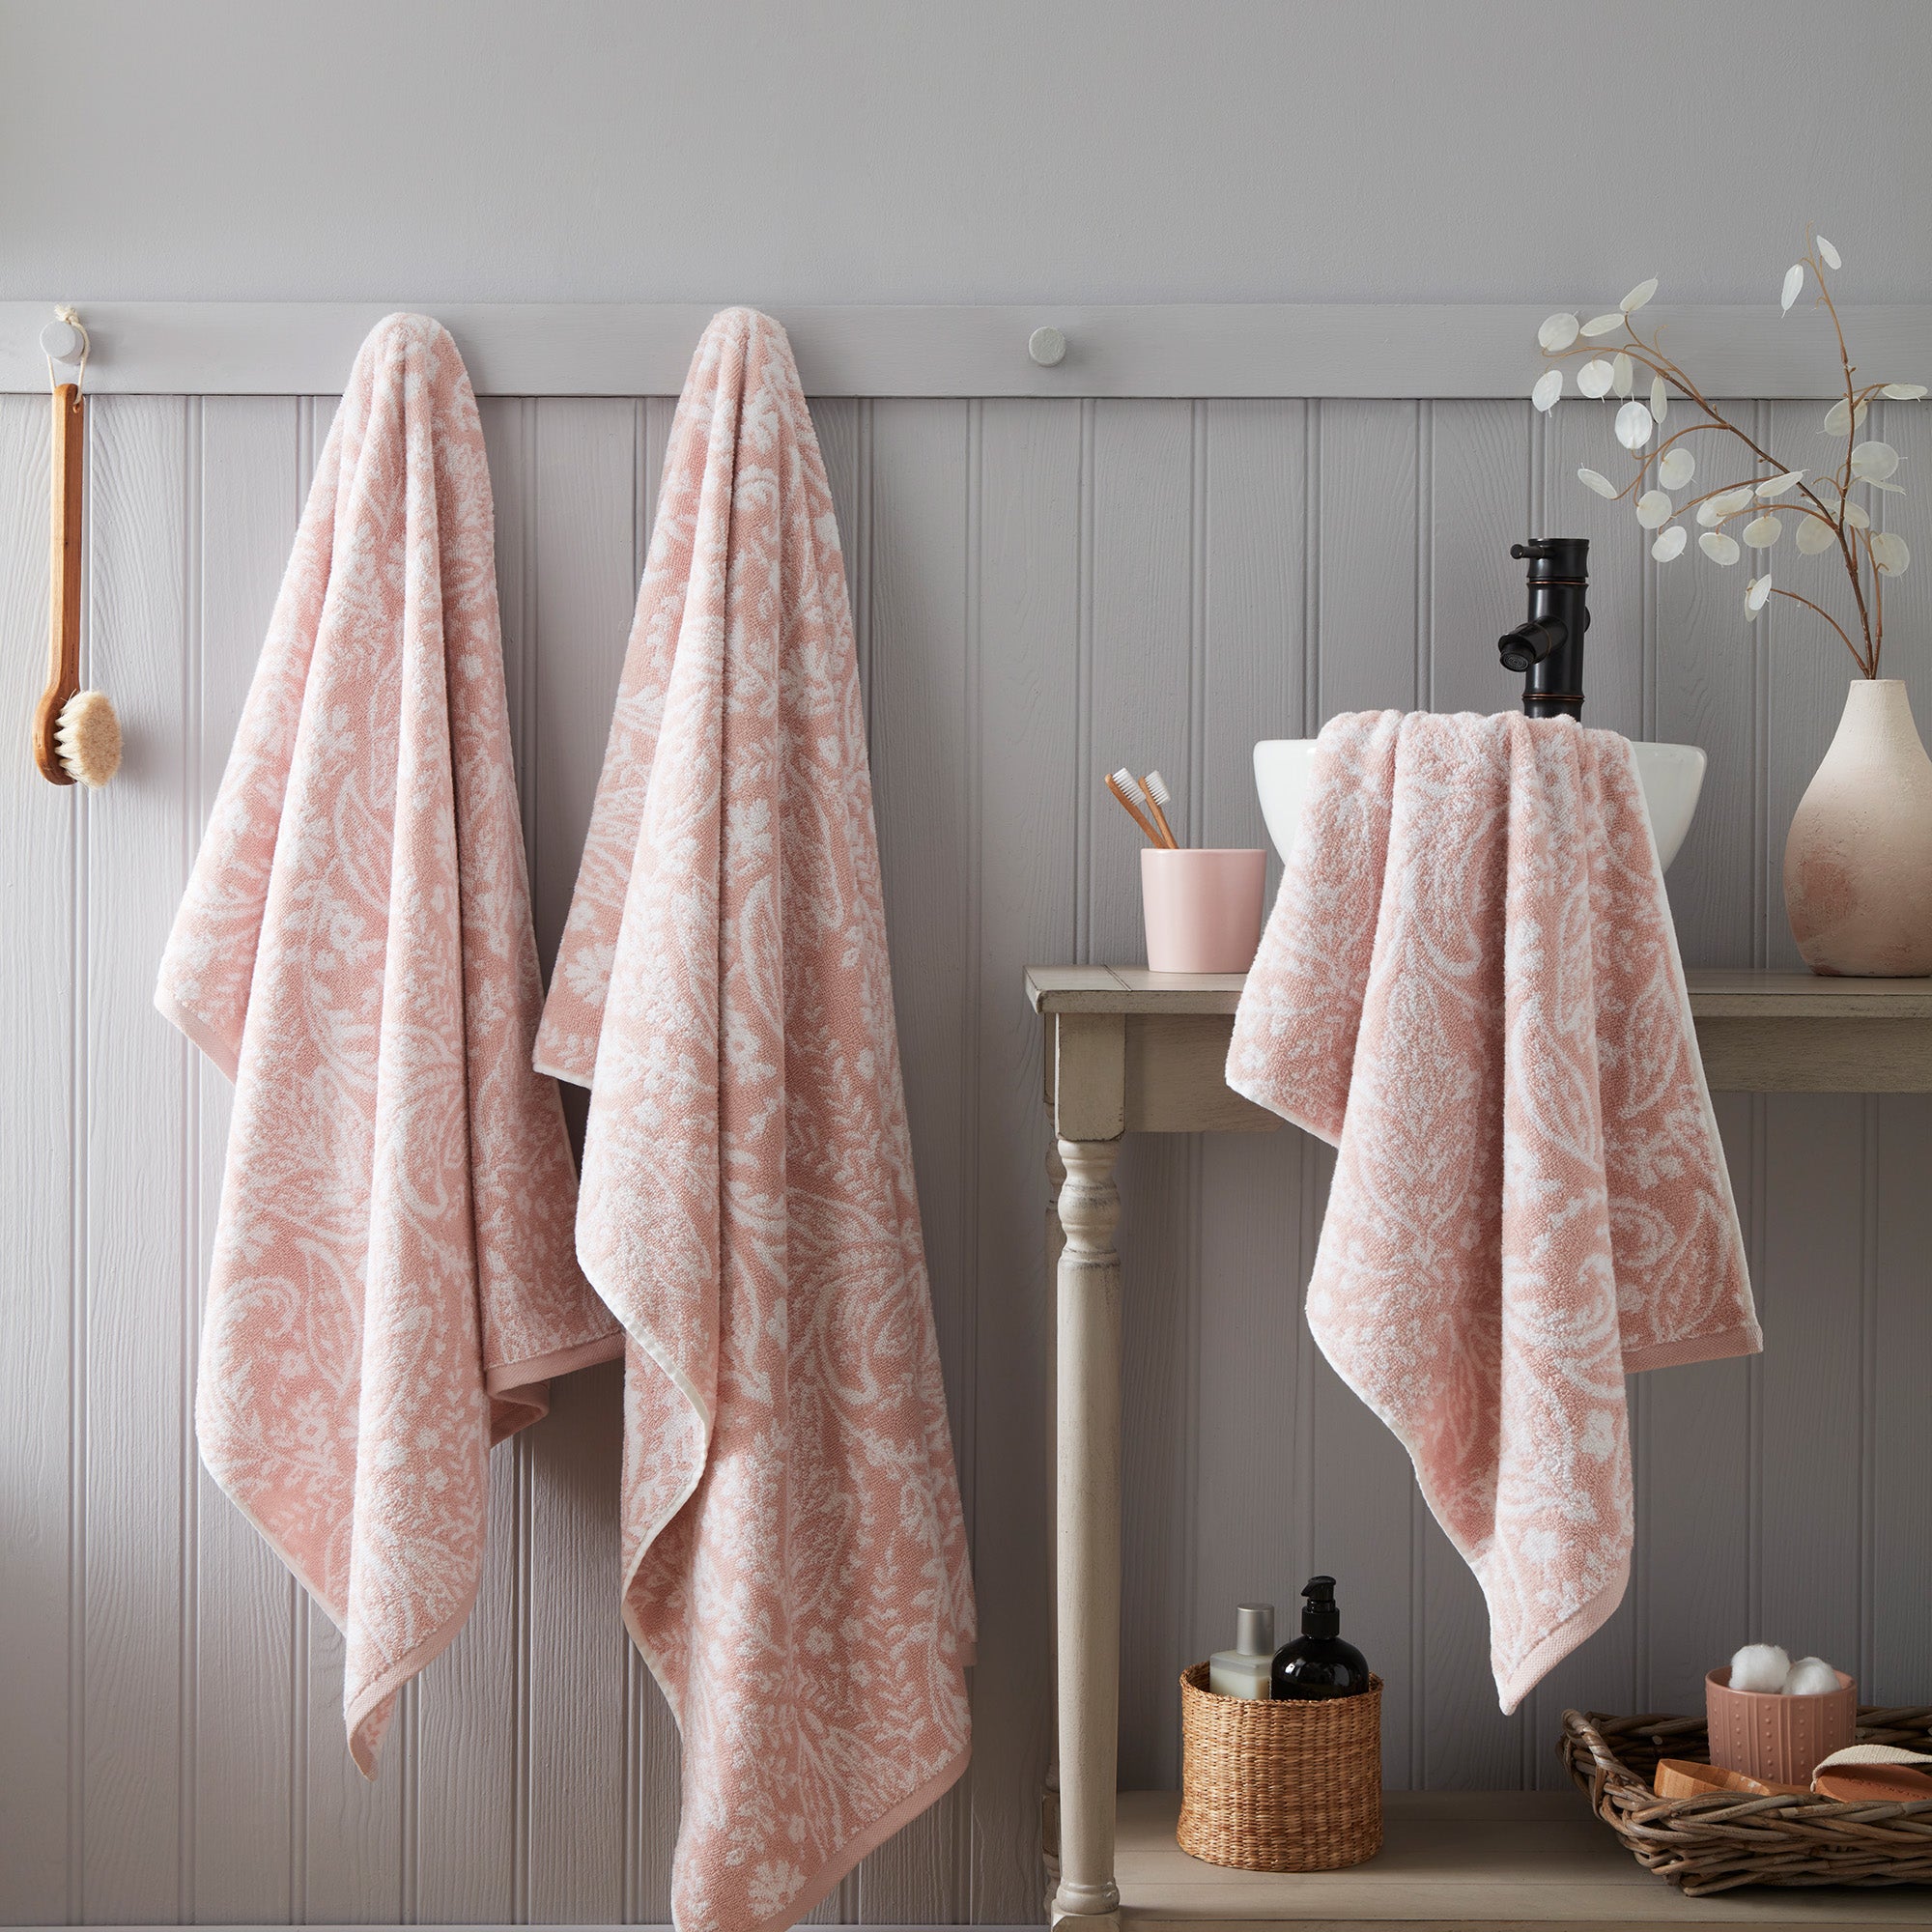 Hand Towel Aveline by D&D Bathroom in Soft Pink